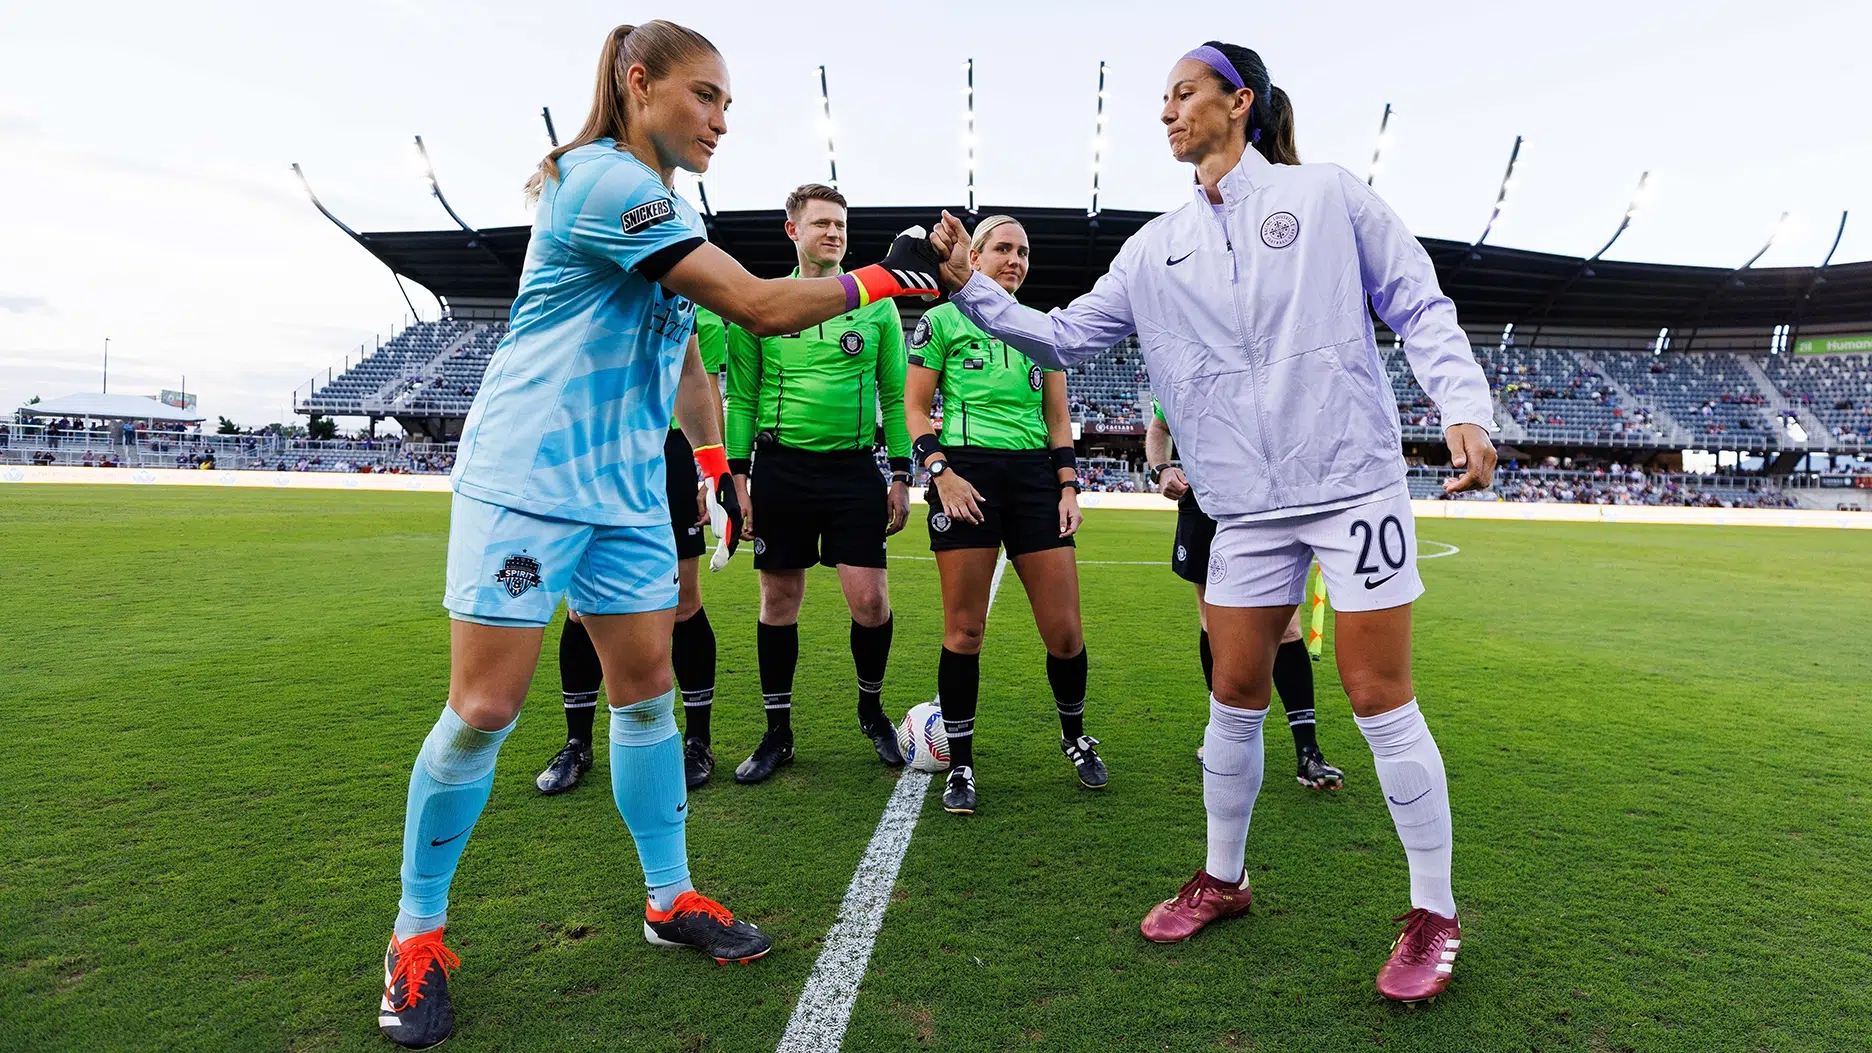 Aubrey Kingsbury in a blue kit gives a fist bump to a Racing Louisville captain as three refs in bright green stand in the background.